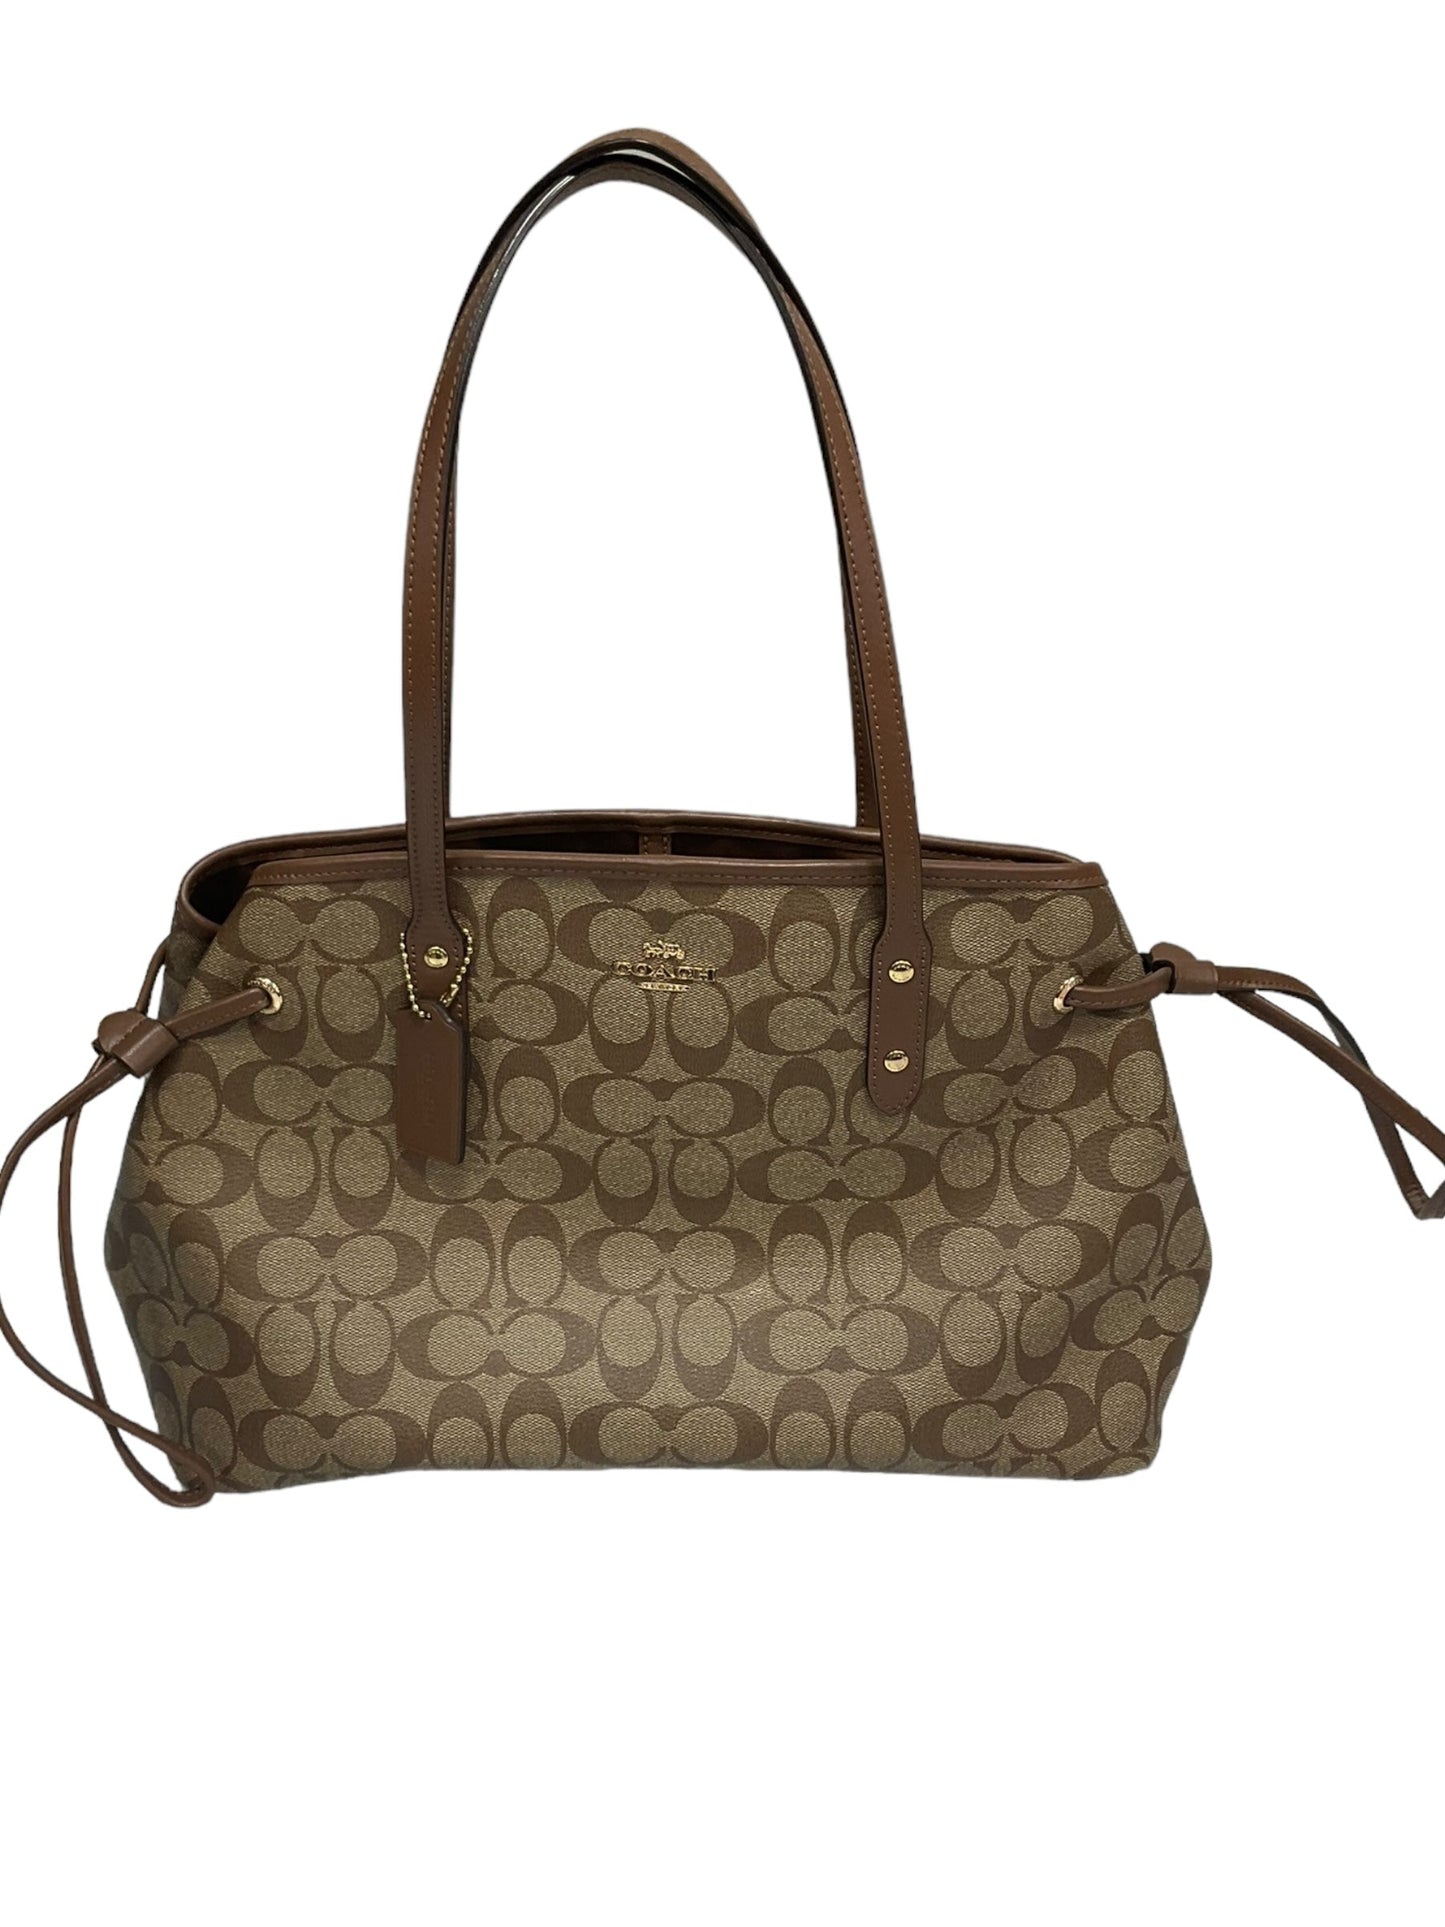 Handbag Leather By Coach  Size: Large